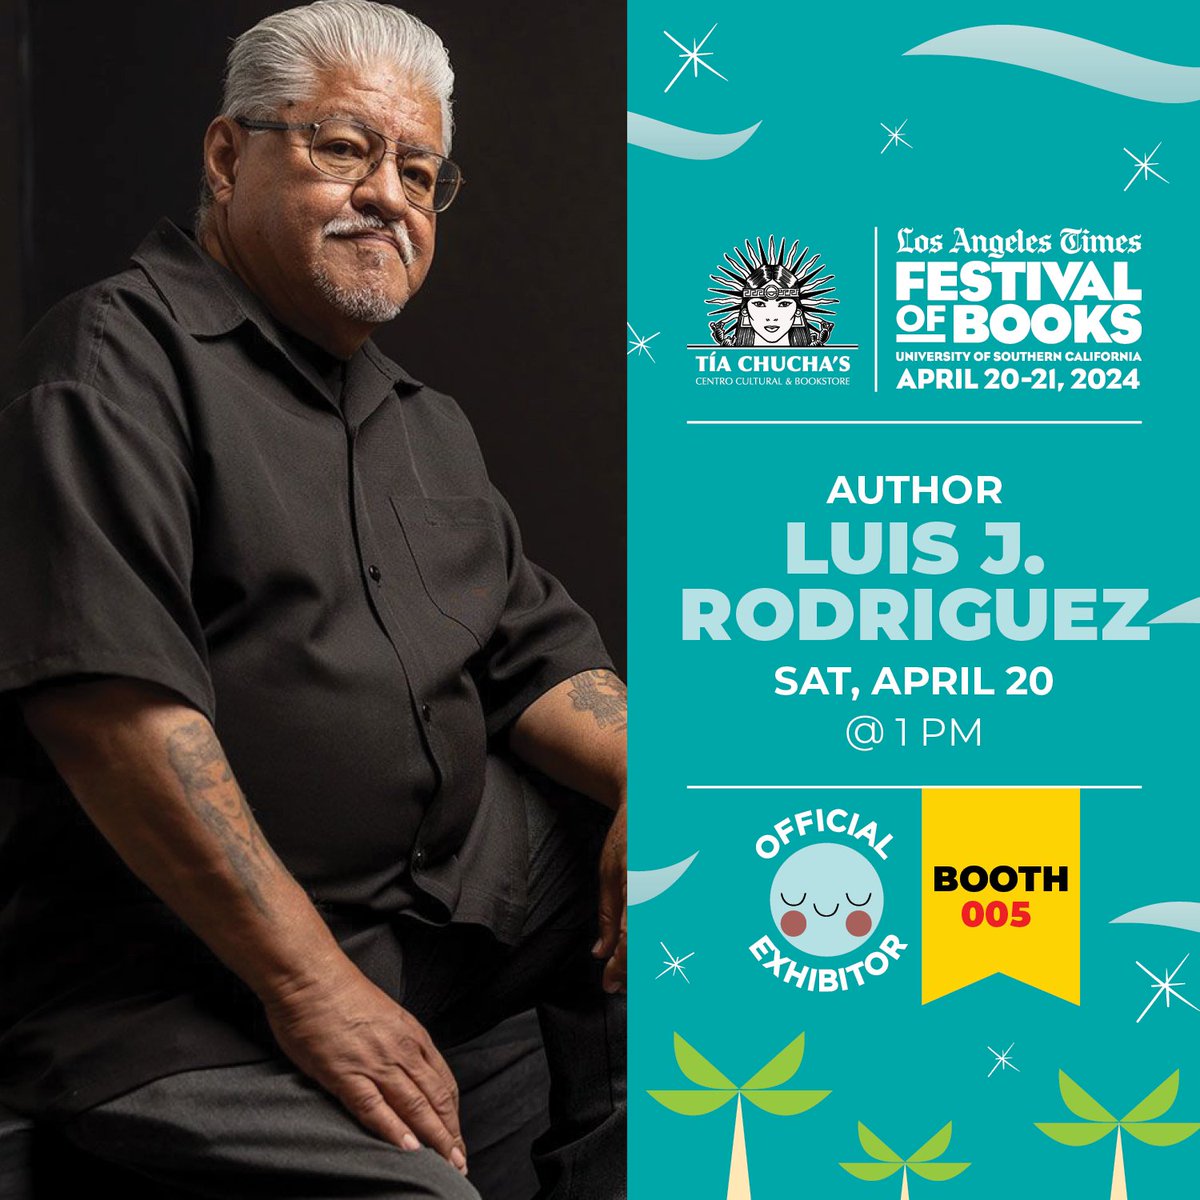 I'm very proud to be signing books for Tia Chucha's Centro Cultural & Bookstore at the Los Angeles Times Festival of Books at USC tomorrow, April 20. I'm there at 1 pm at booth 005. Please come by!